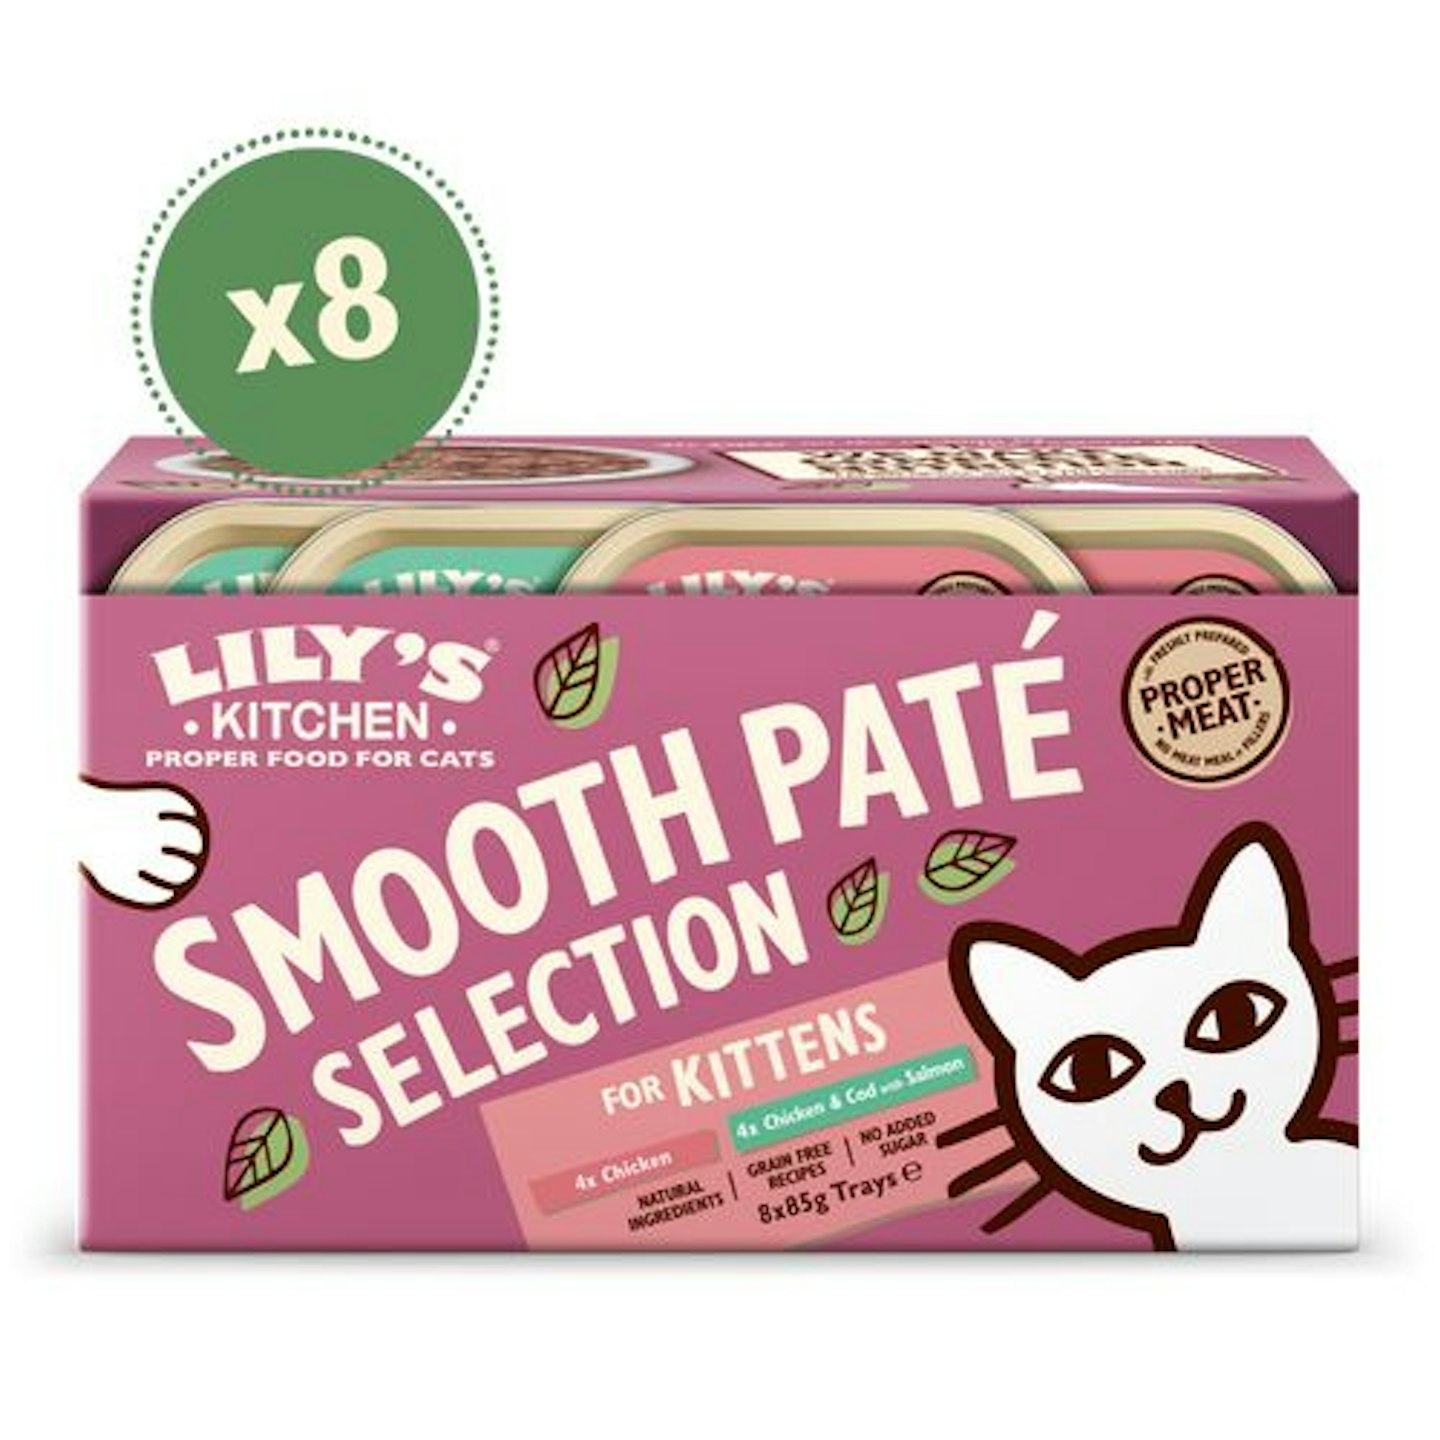 Lily's Kitchen Smooth Pate Wet Kitten Food Chicken + Cod Multipack